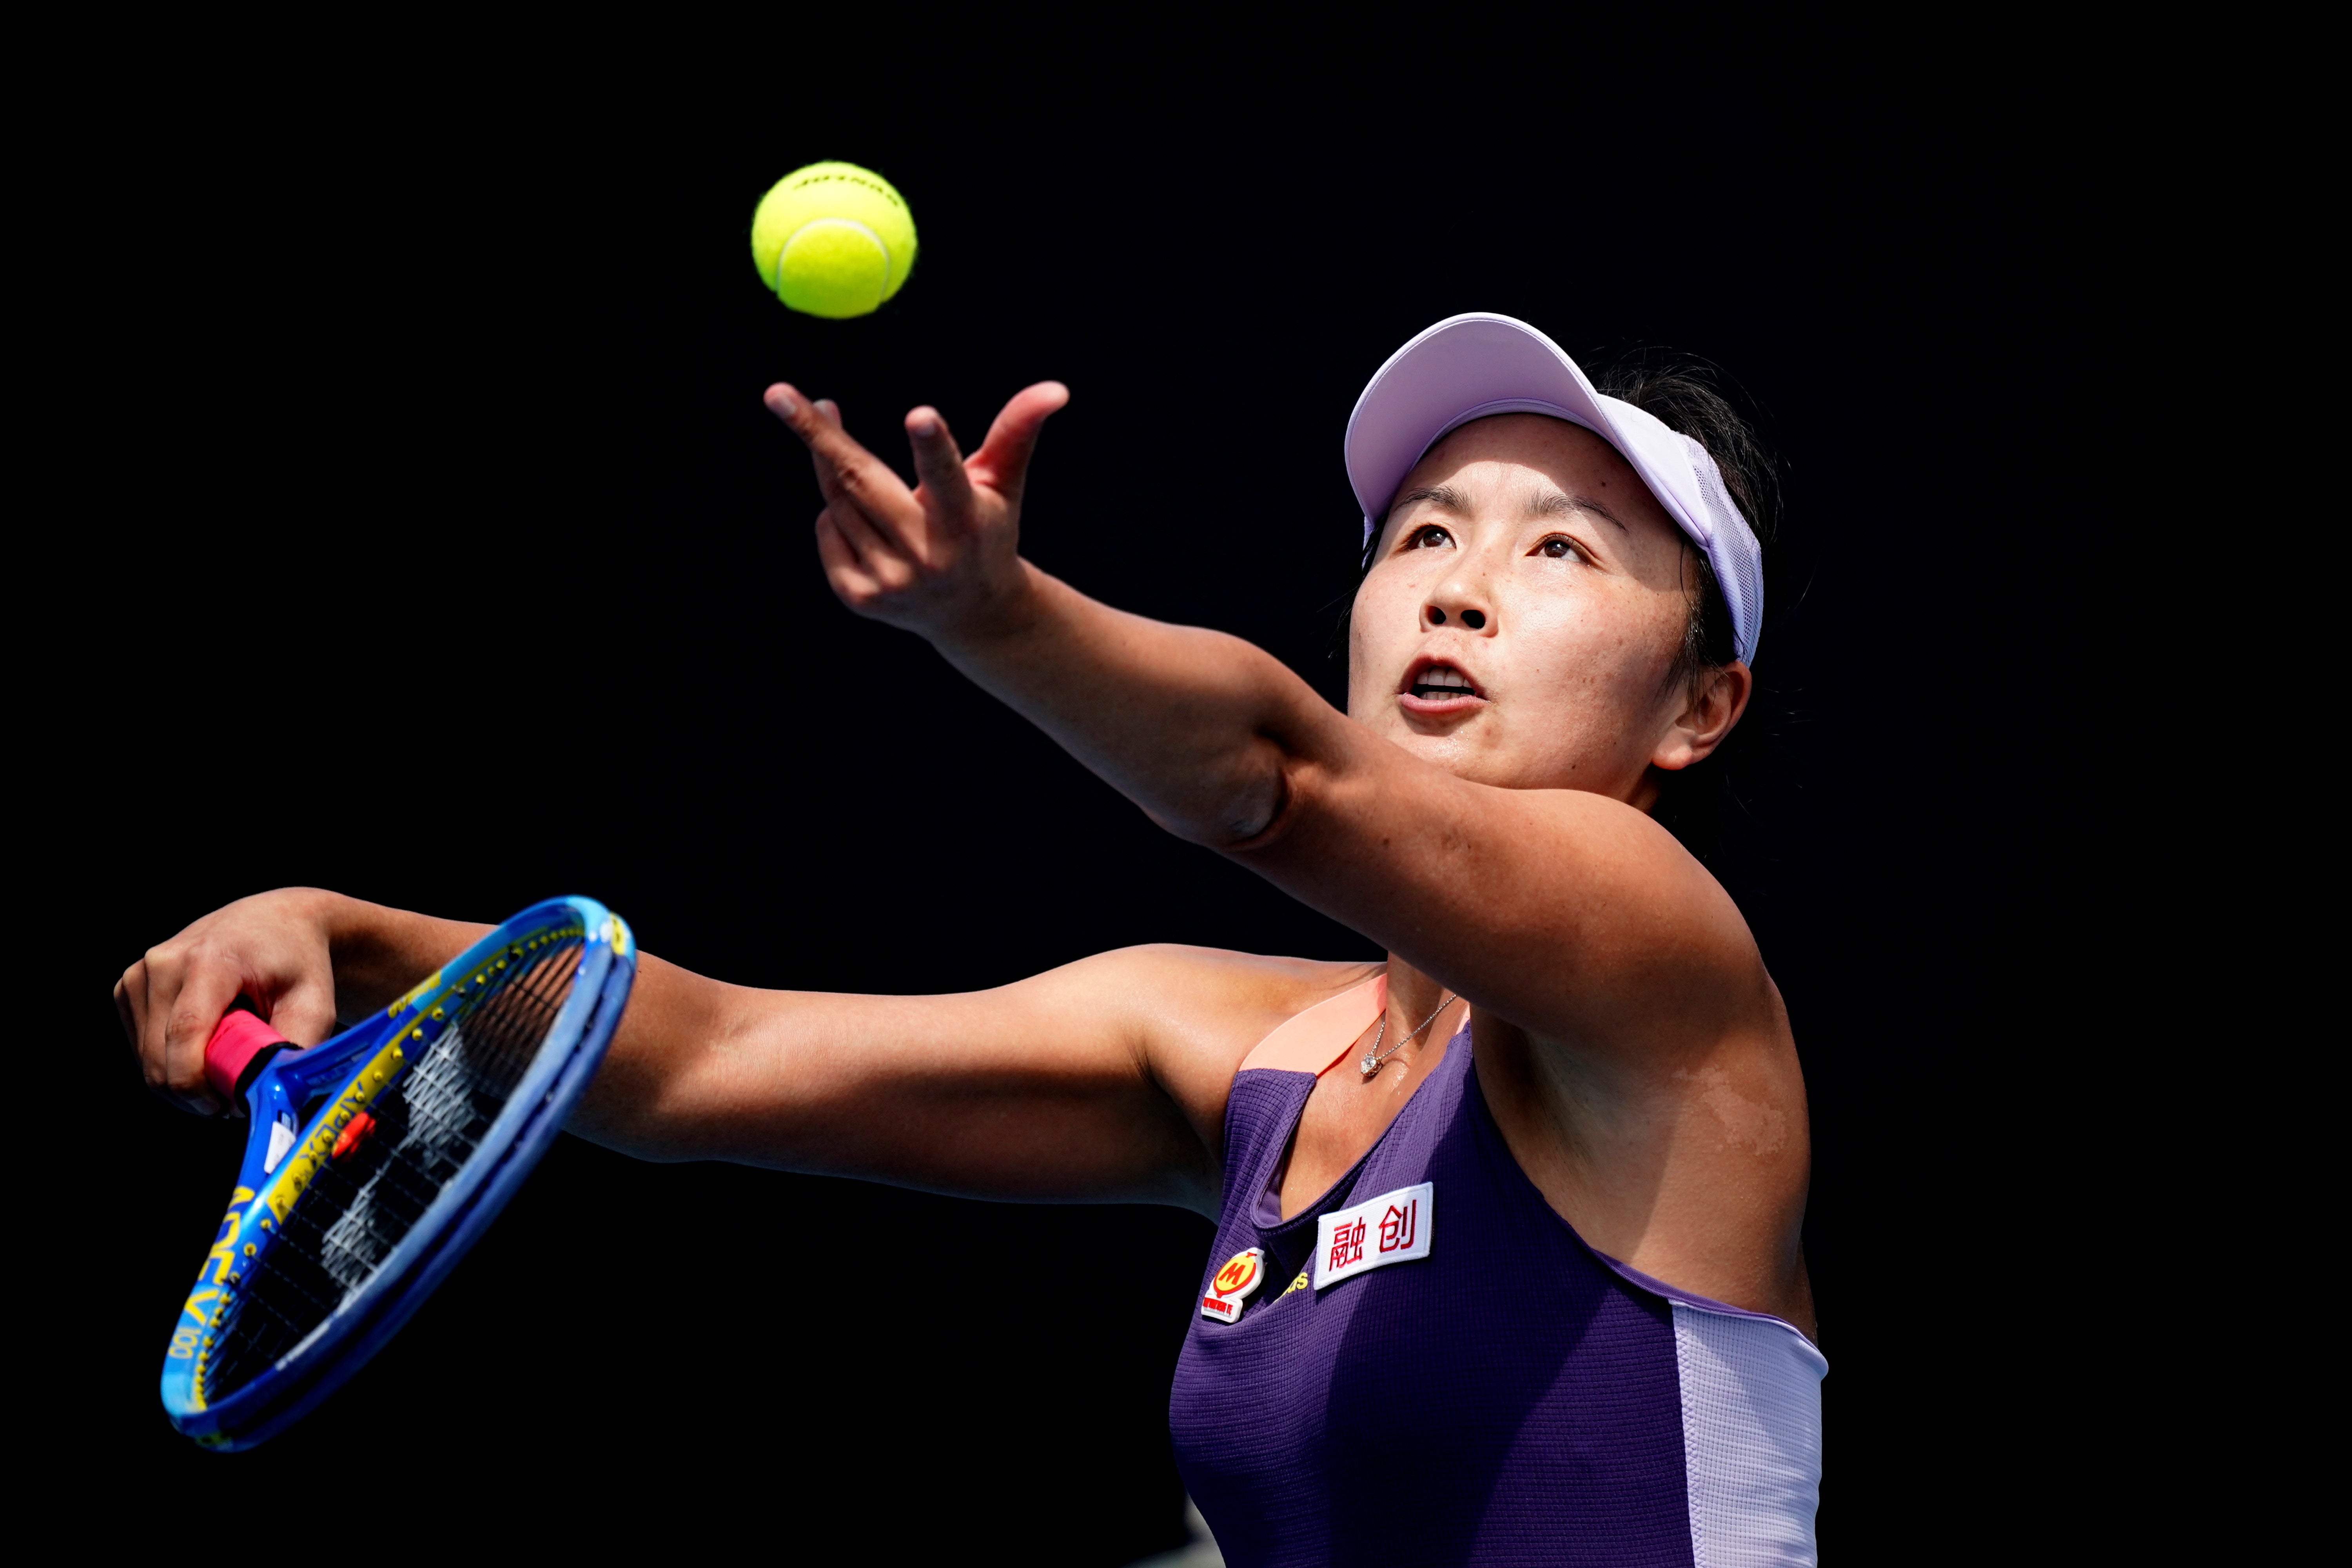 Fears over the wellbeing of China's Peng Shuai have led to the WTA suspending all of its tournaments in the country